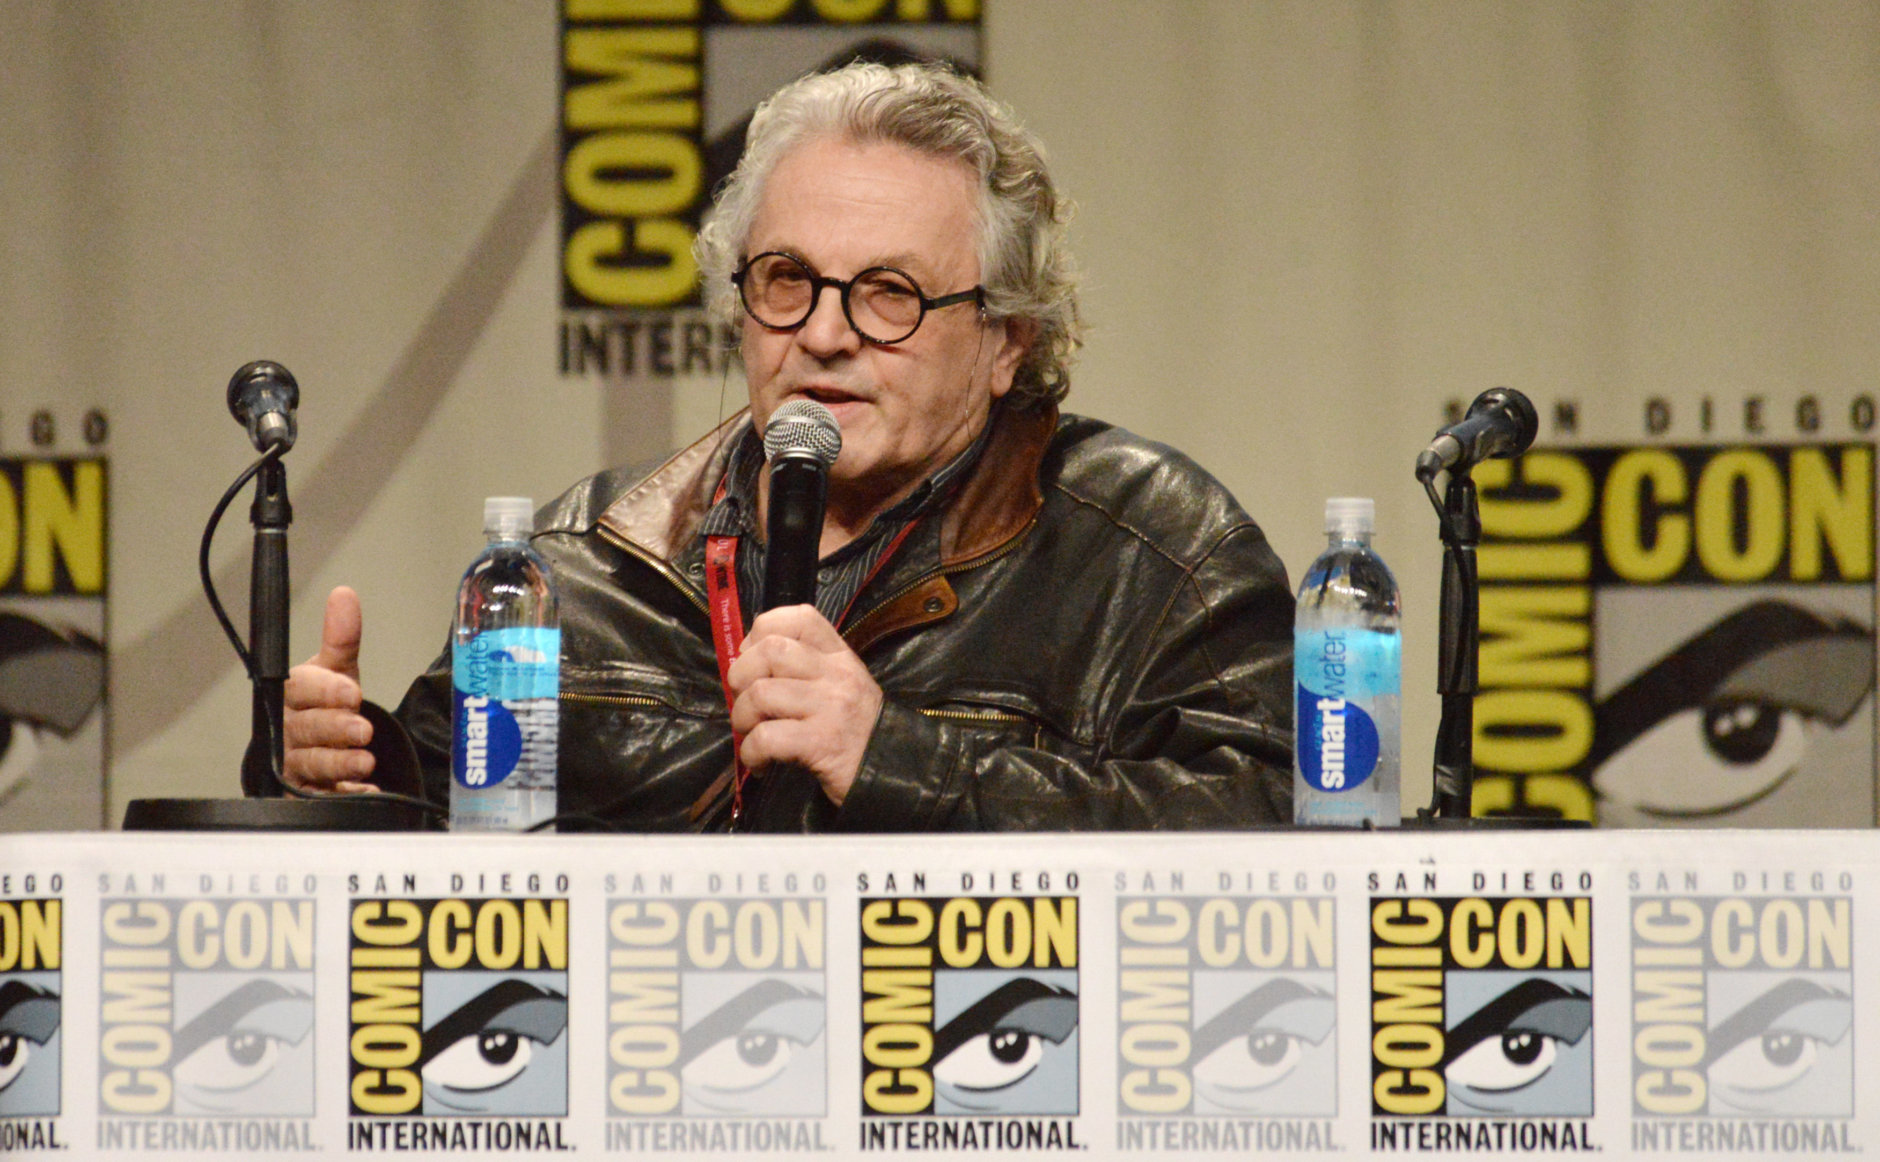 FILE - This July 26, 2014 file photo shows director George Miller speaking at the Warner Bros. Pictures panel for "Mad Max: Fury Road" on Day 3 of Comic-Con International in San Diego. The film releases in the U.S. on May 15, 2015. (Photo by Richard Shotwell/Invision/AP, File)